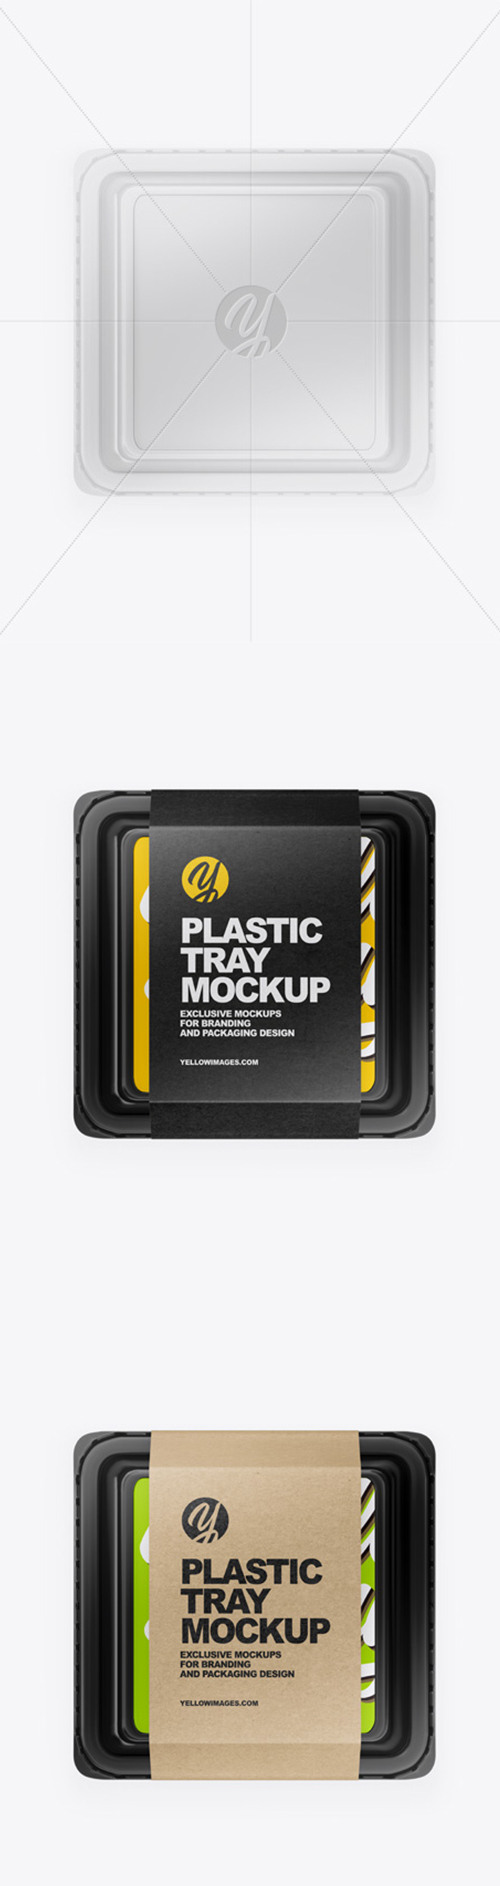 Plastic Tray with Paper Label Mockup 42986 TIF